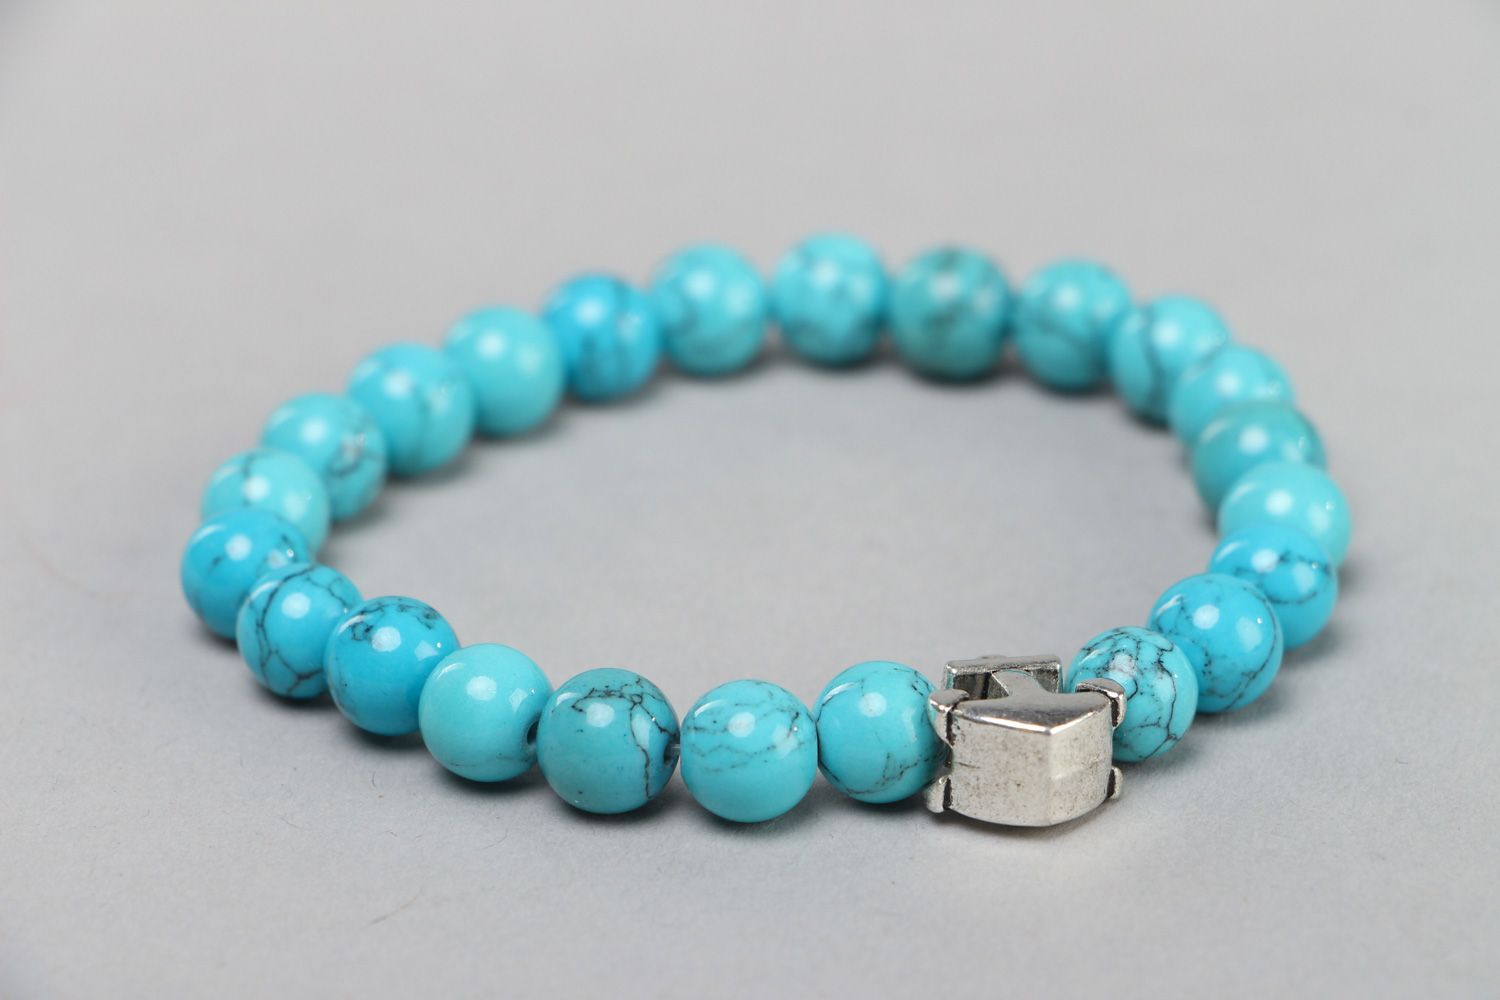 Handmade wrist stretch bracelet with turquoise beads and metal anchor charm photo 2